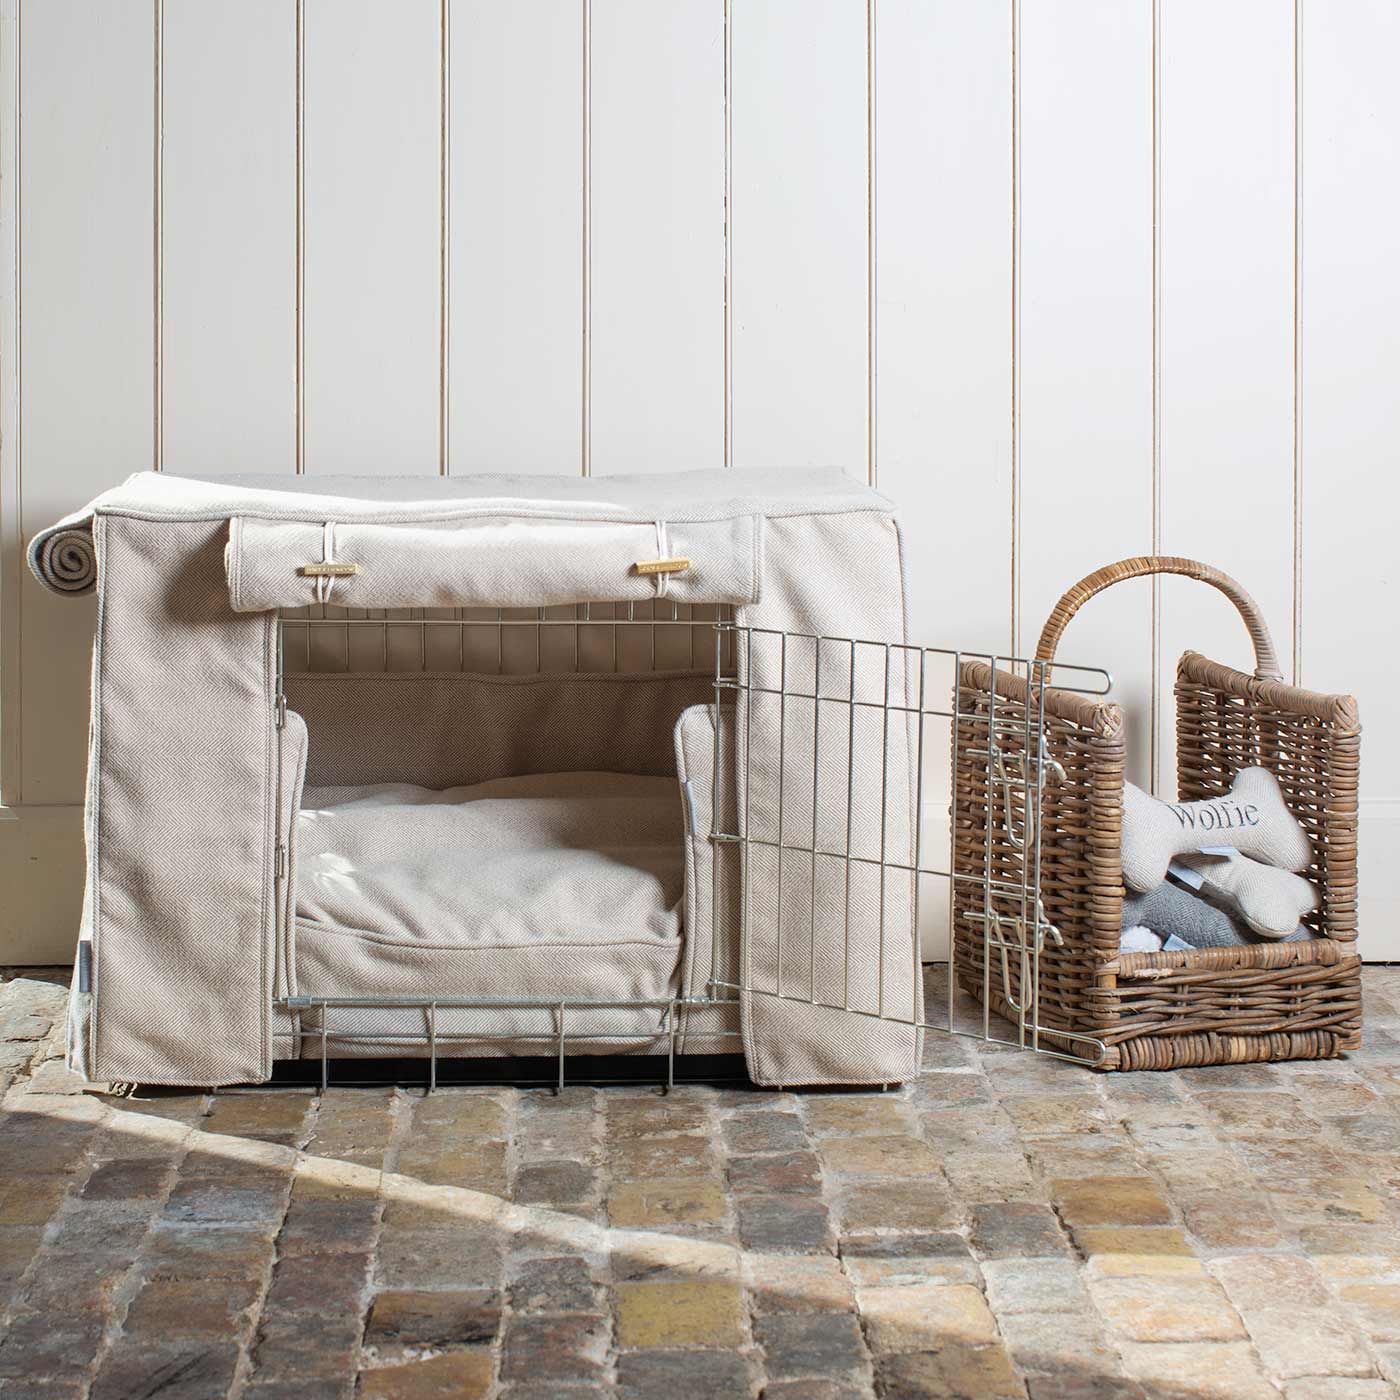 Luxury Heavy Duty Dog Crate, In Stunning Natural Herringbone Tweed Crate Set, The Perfect Dog Crate Set For Building The Ultimate Pet Den! Dog Crate Cover Available To Personalise at Lords & Labradors